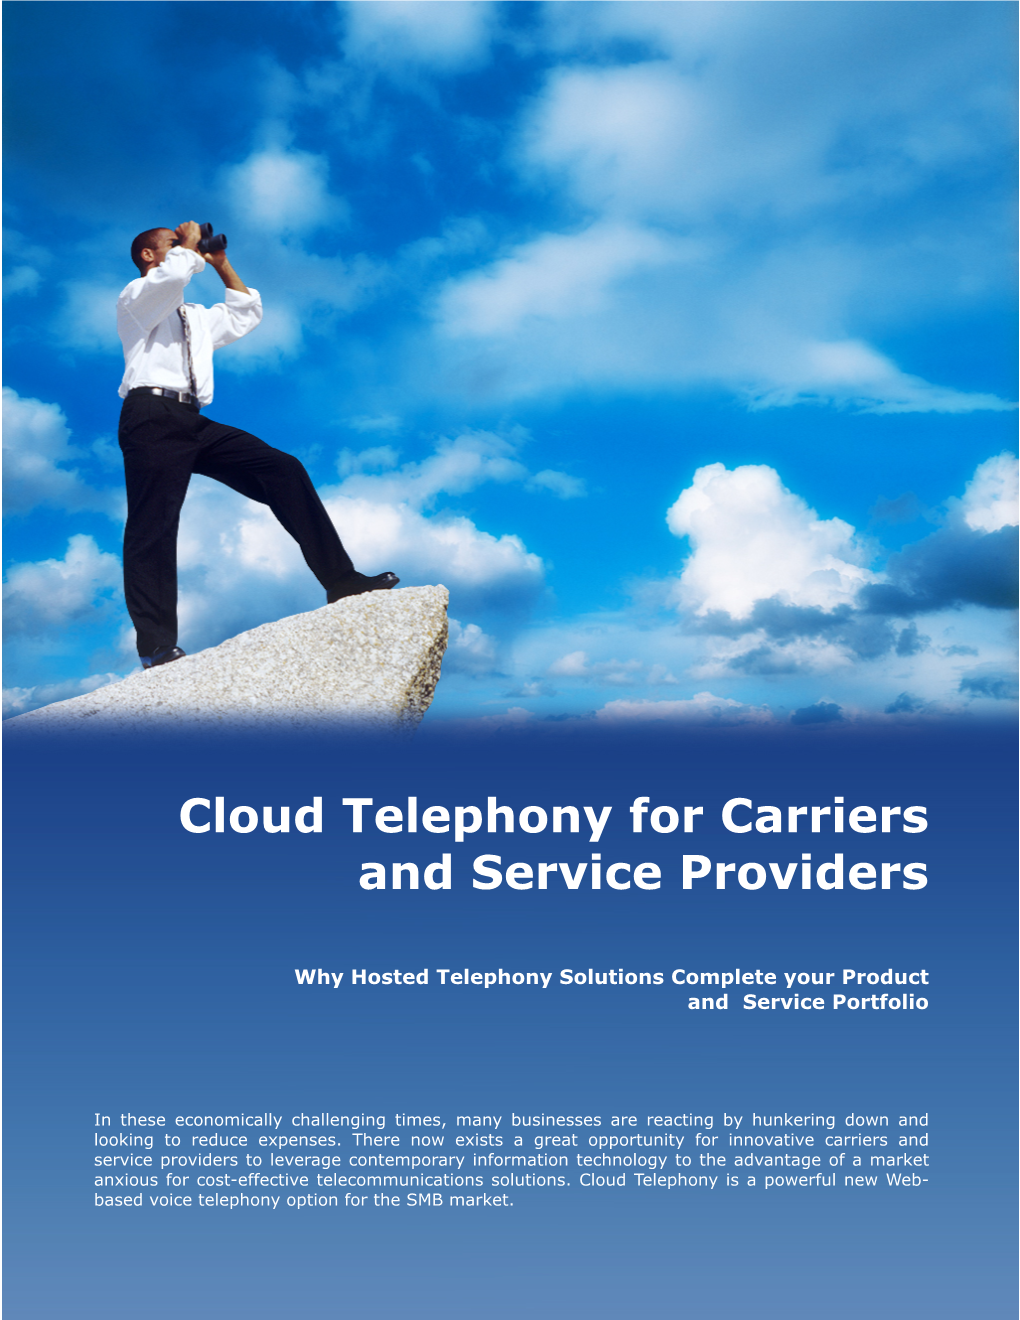 Cloud Telephony for Carriers and Service Providers